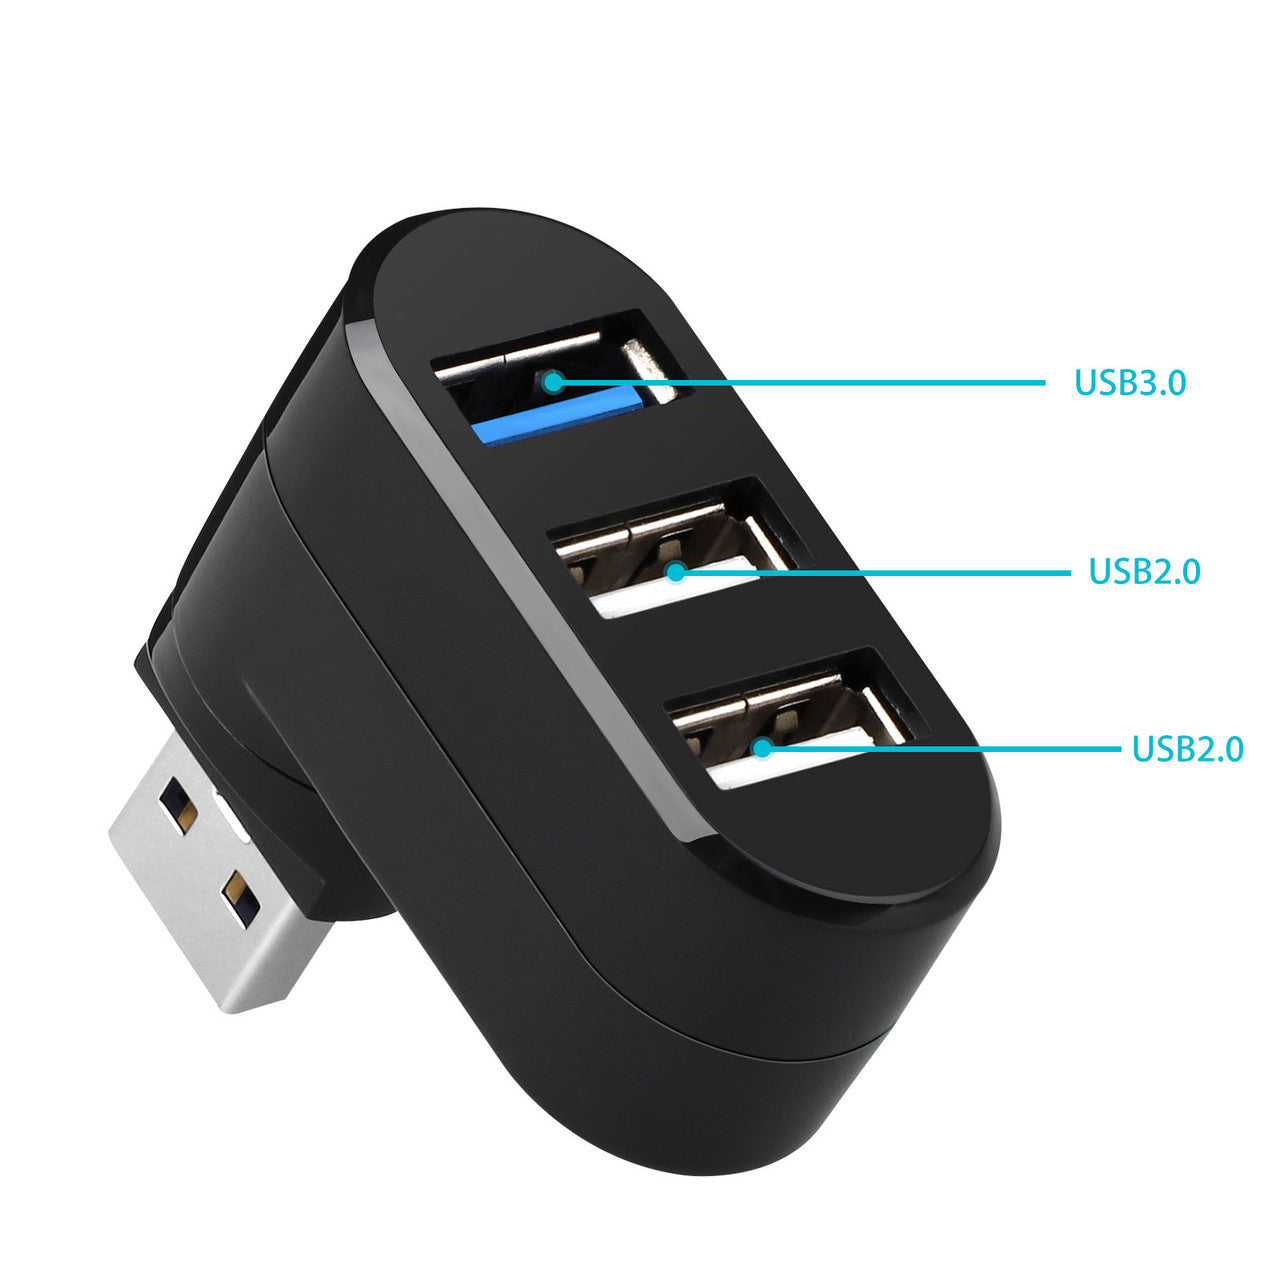 3-Port USB 3.0 Hub 5Gbps High Speed USB HUB for PC Laptop Macbook Computer Tablet Notebook and More(Black)